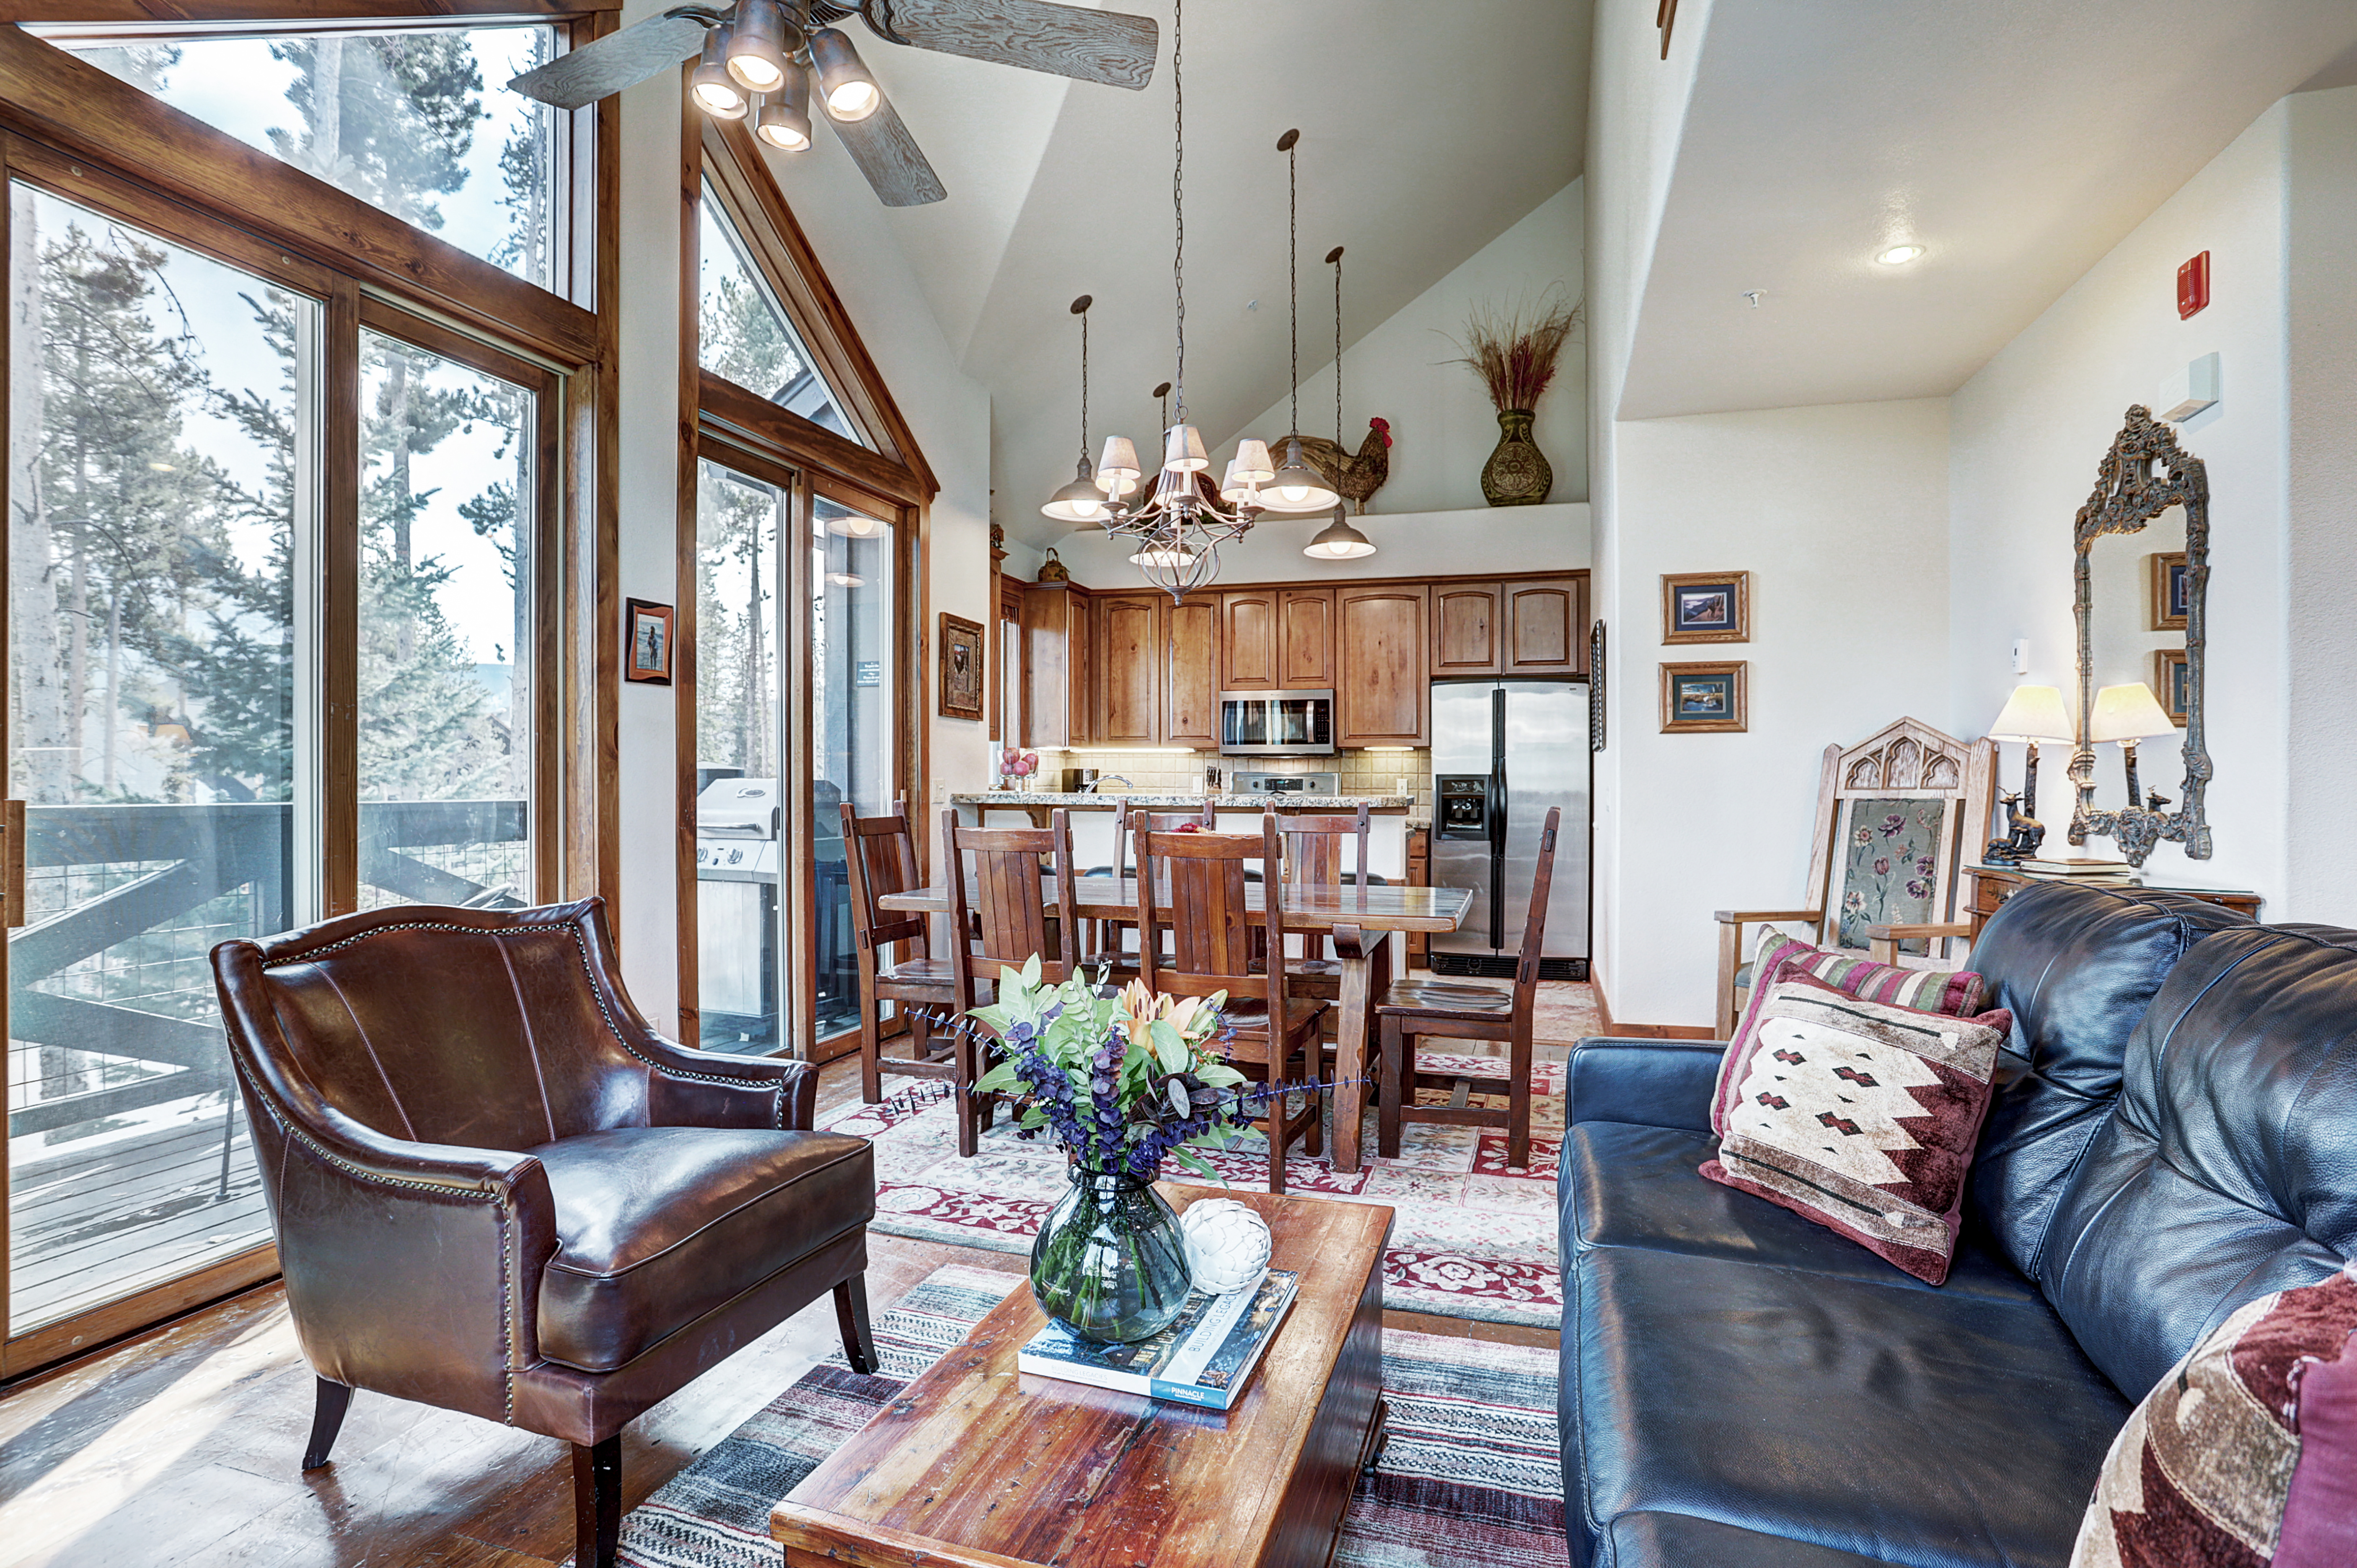 Open up the sliding glass doors on a warm day and enjoy the fresh air - Amber Sky Breckenridge Vacation Rental